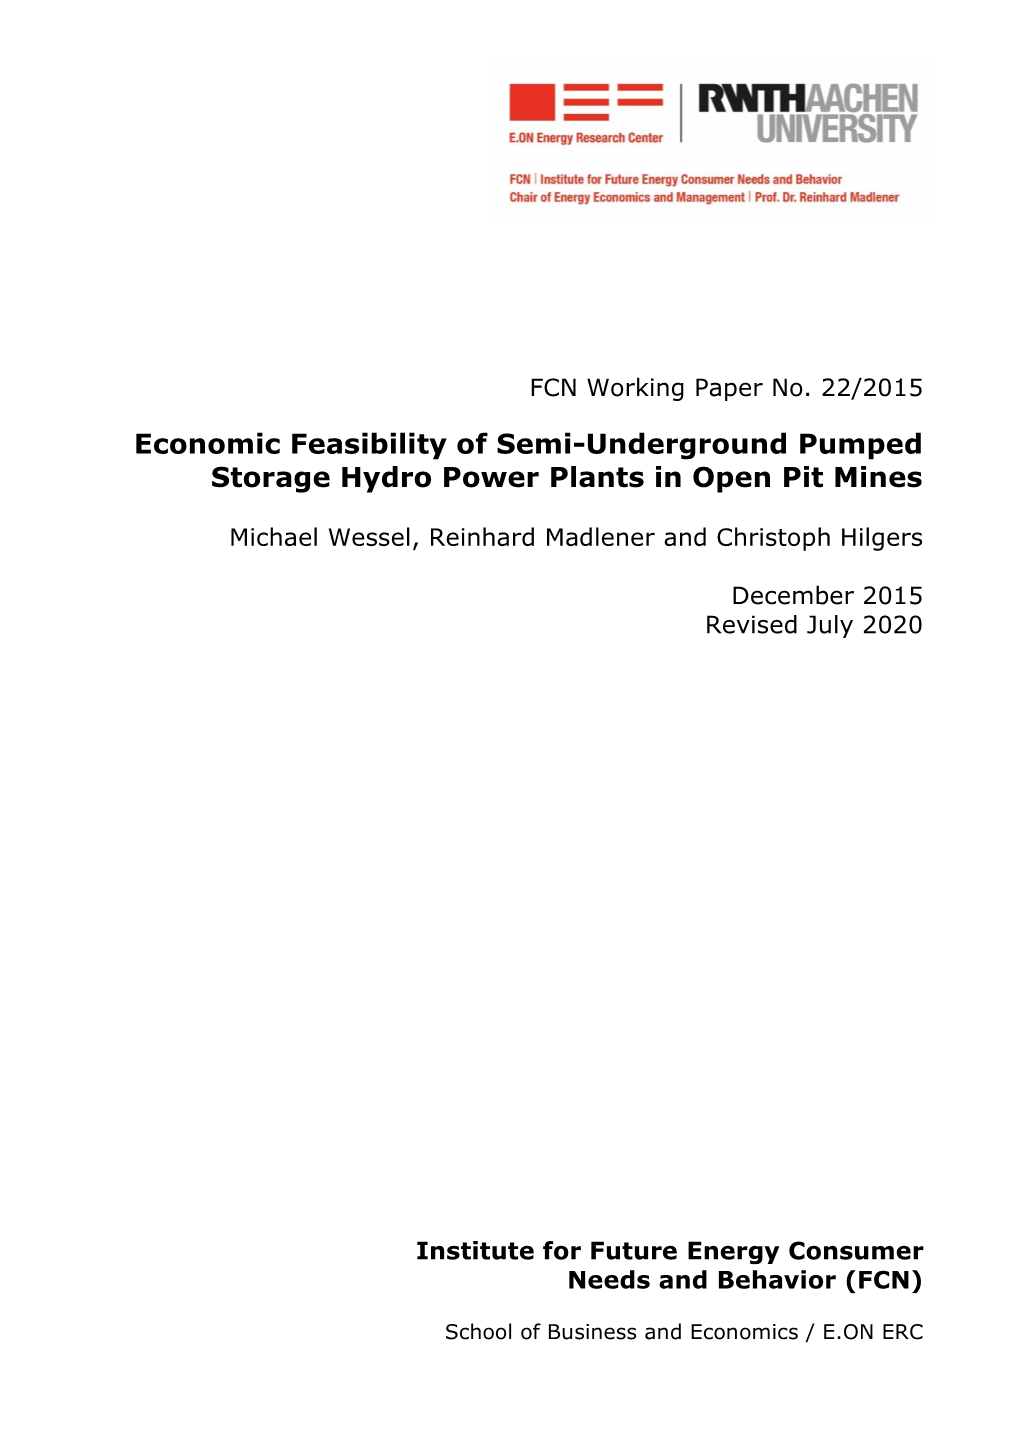 Economic Feasibility of Semi-Underground Pumped Storage Hydro Power Plants in Open Pit Mines